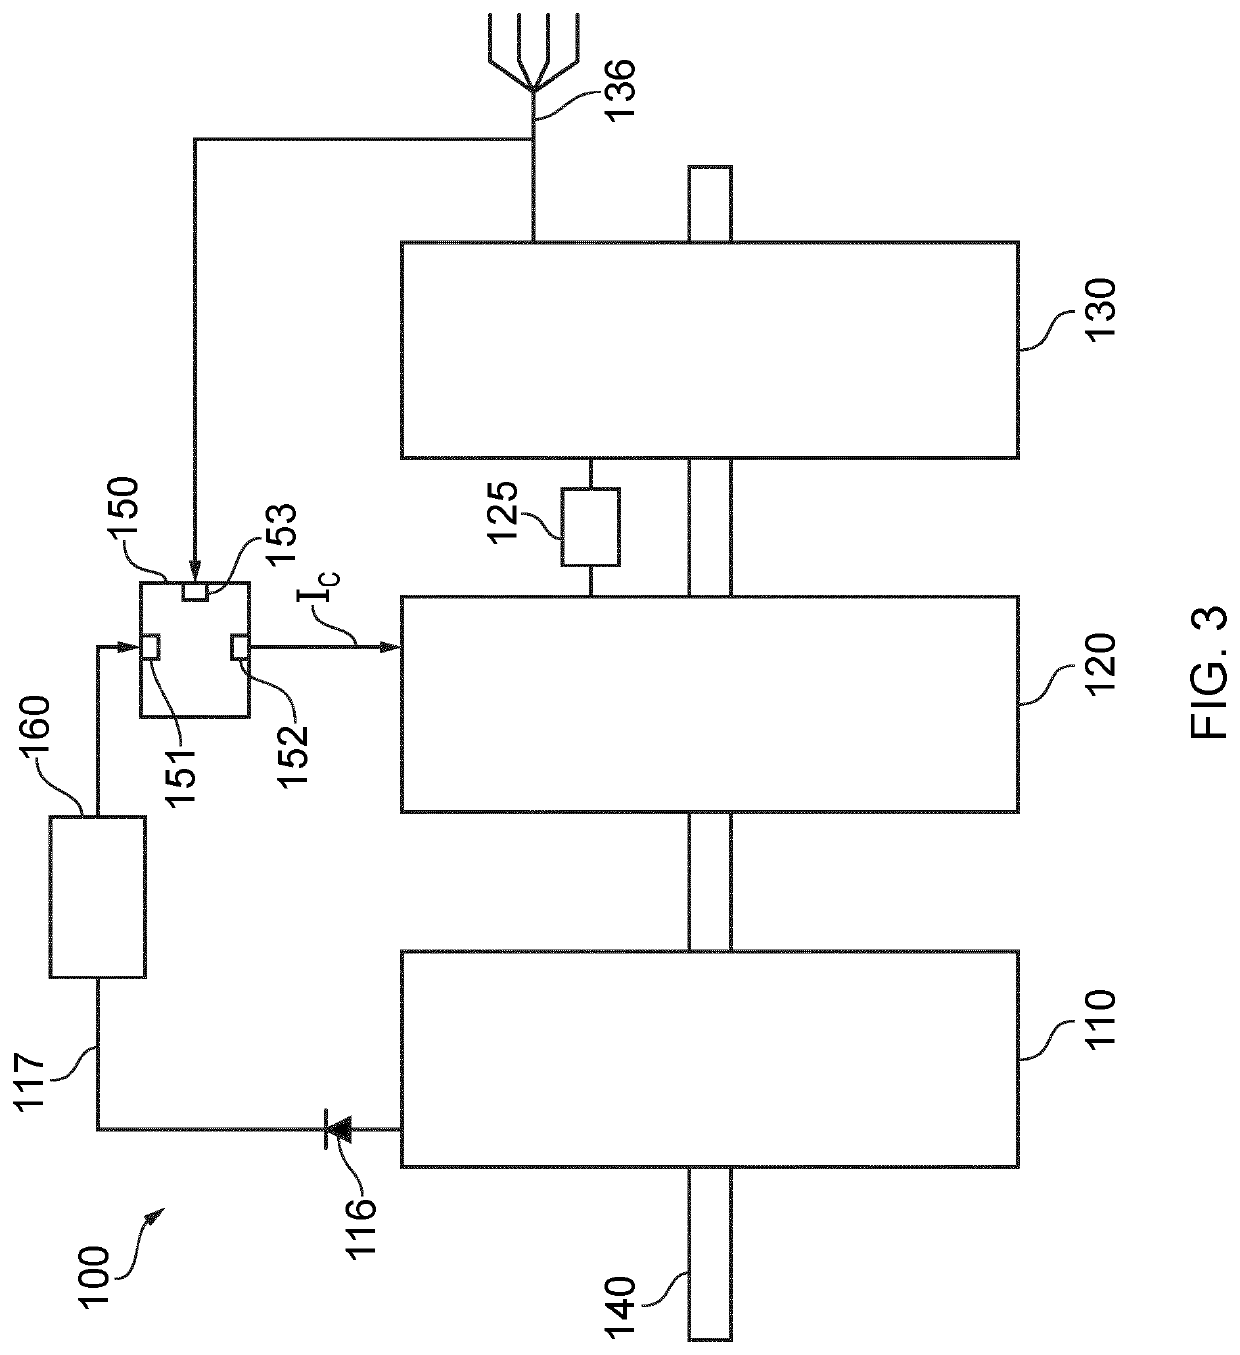 Multi-stage synchronous generator